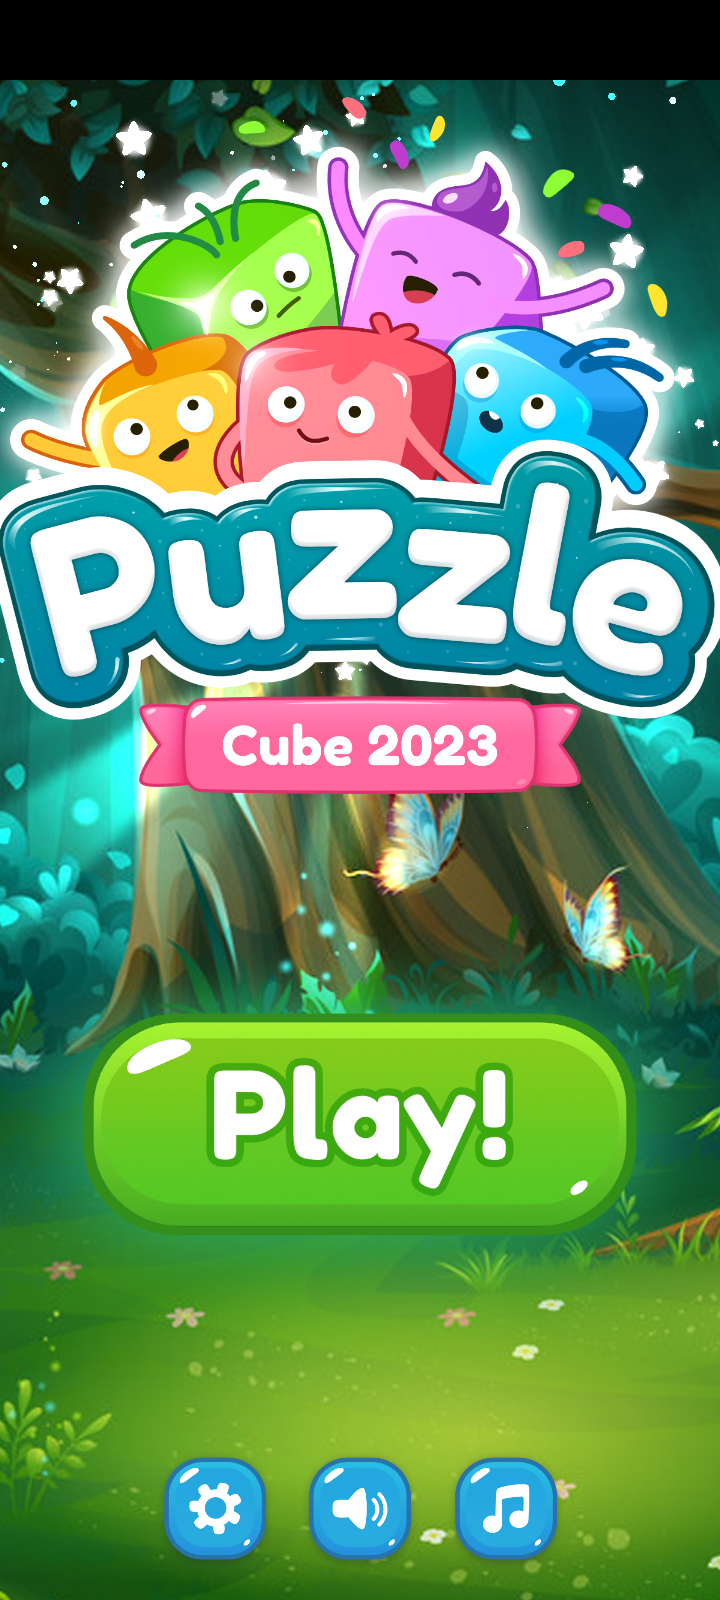 Screenshot 1 of Puzzle Cube - Game Puzzle 2023 0.1